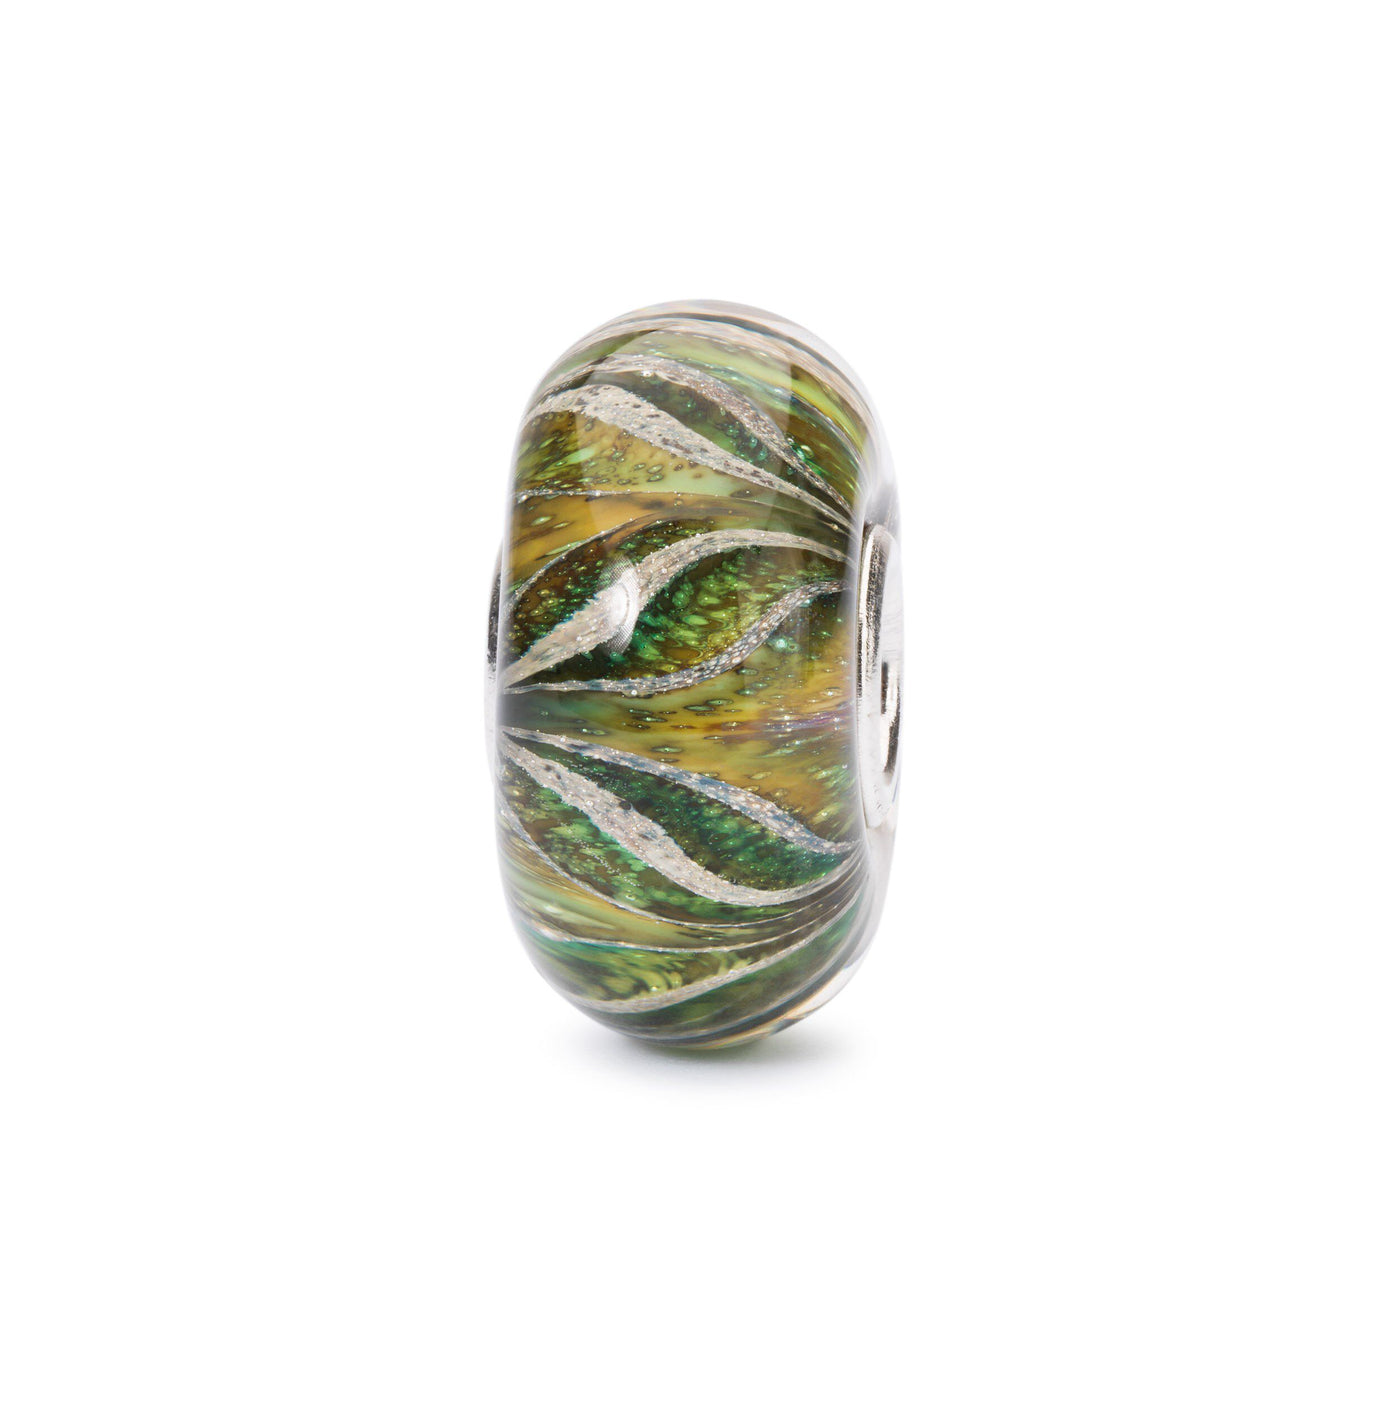 Roots of Spirit - Trollbeads Canada